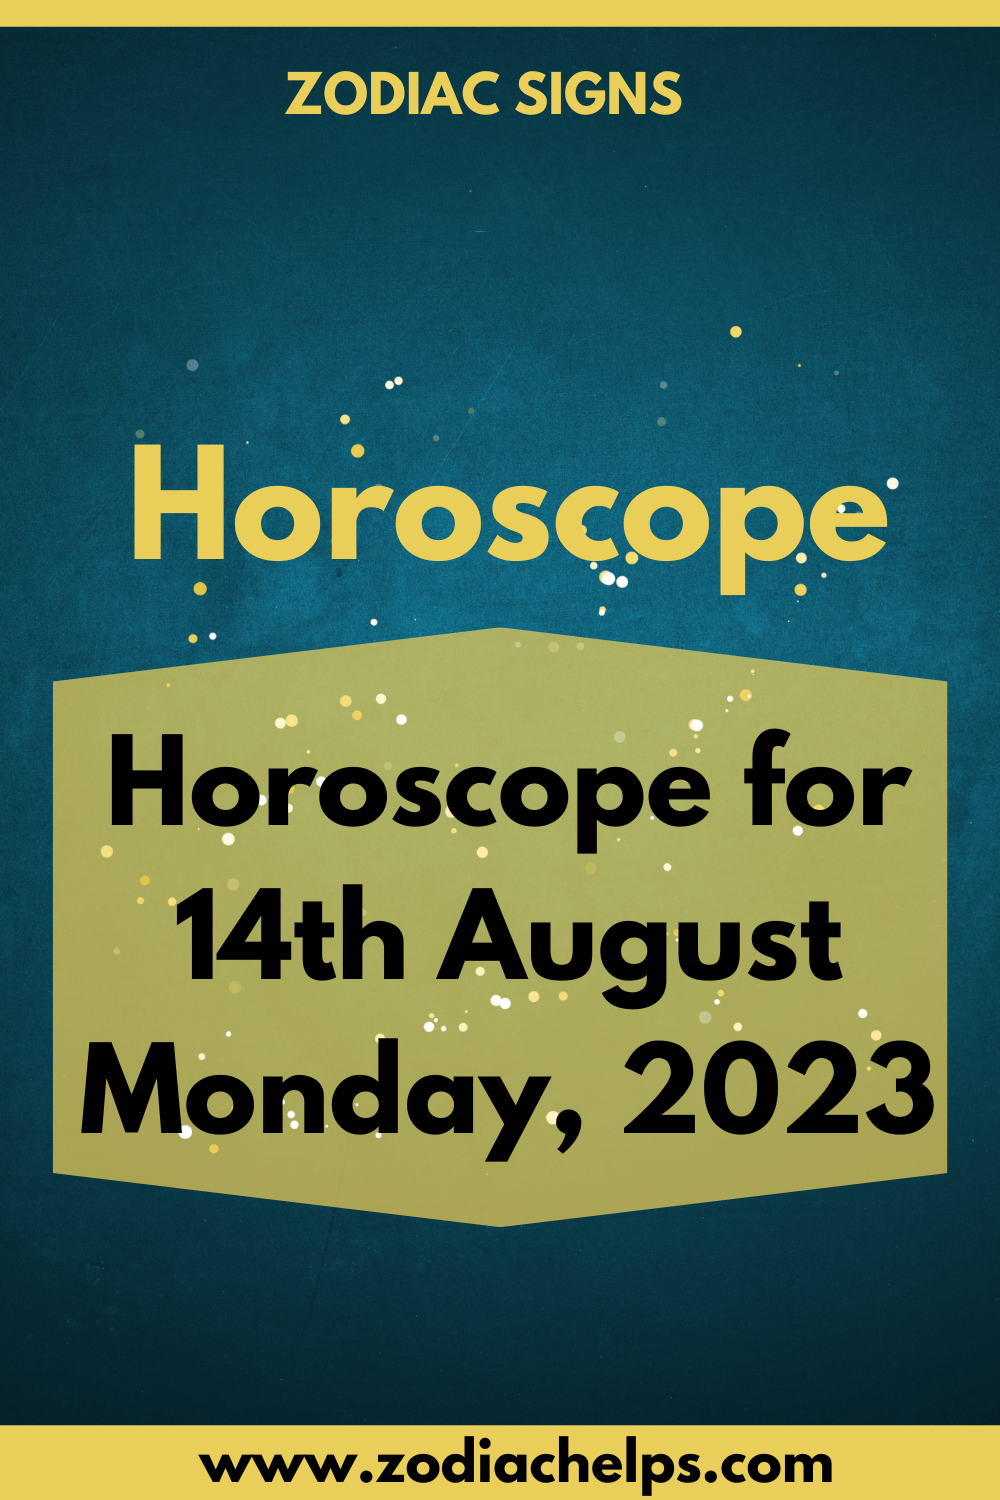 Horoscope for 14th August Monday, 2023